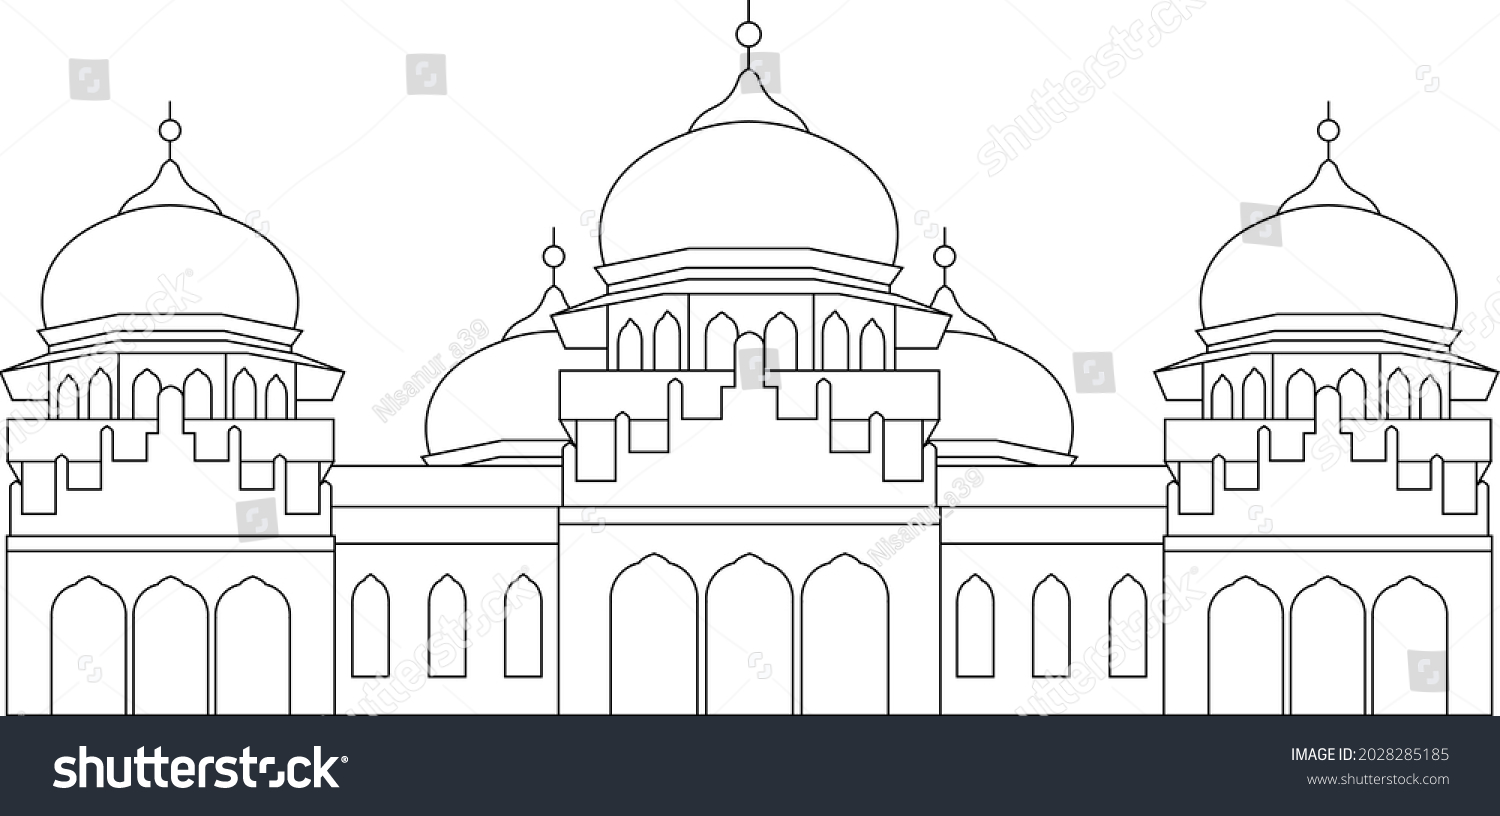 SVG of Vector graphics illustration of Baiturrahman Grand Mosque, a public building located in the center of Banda Aceh city, Aceh Province, Indonesia. svg